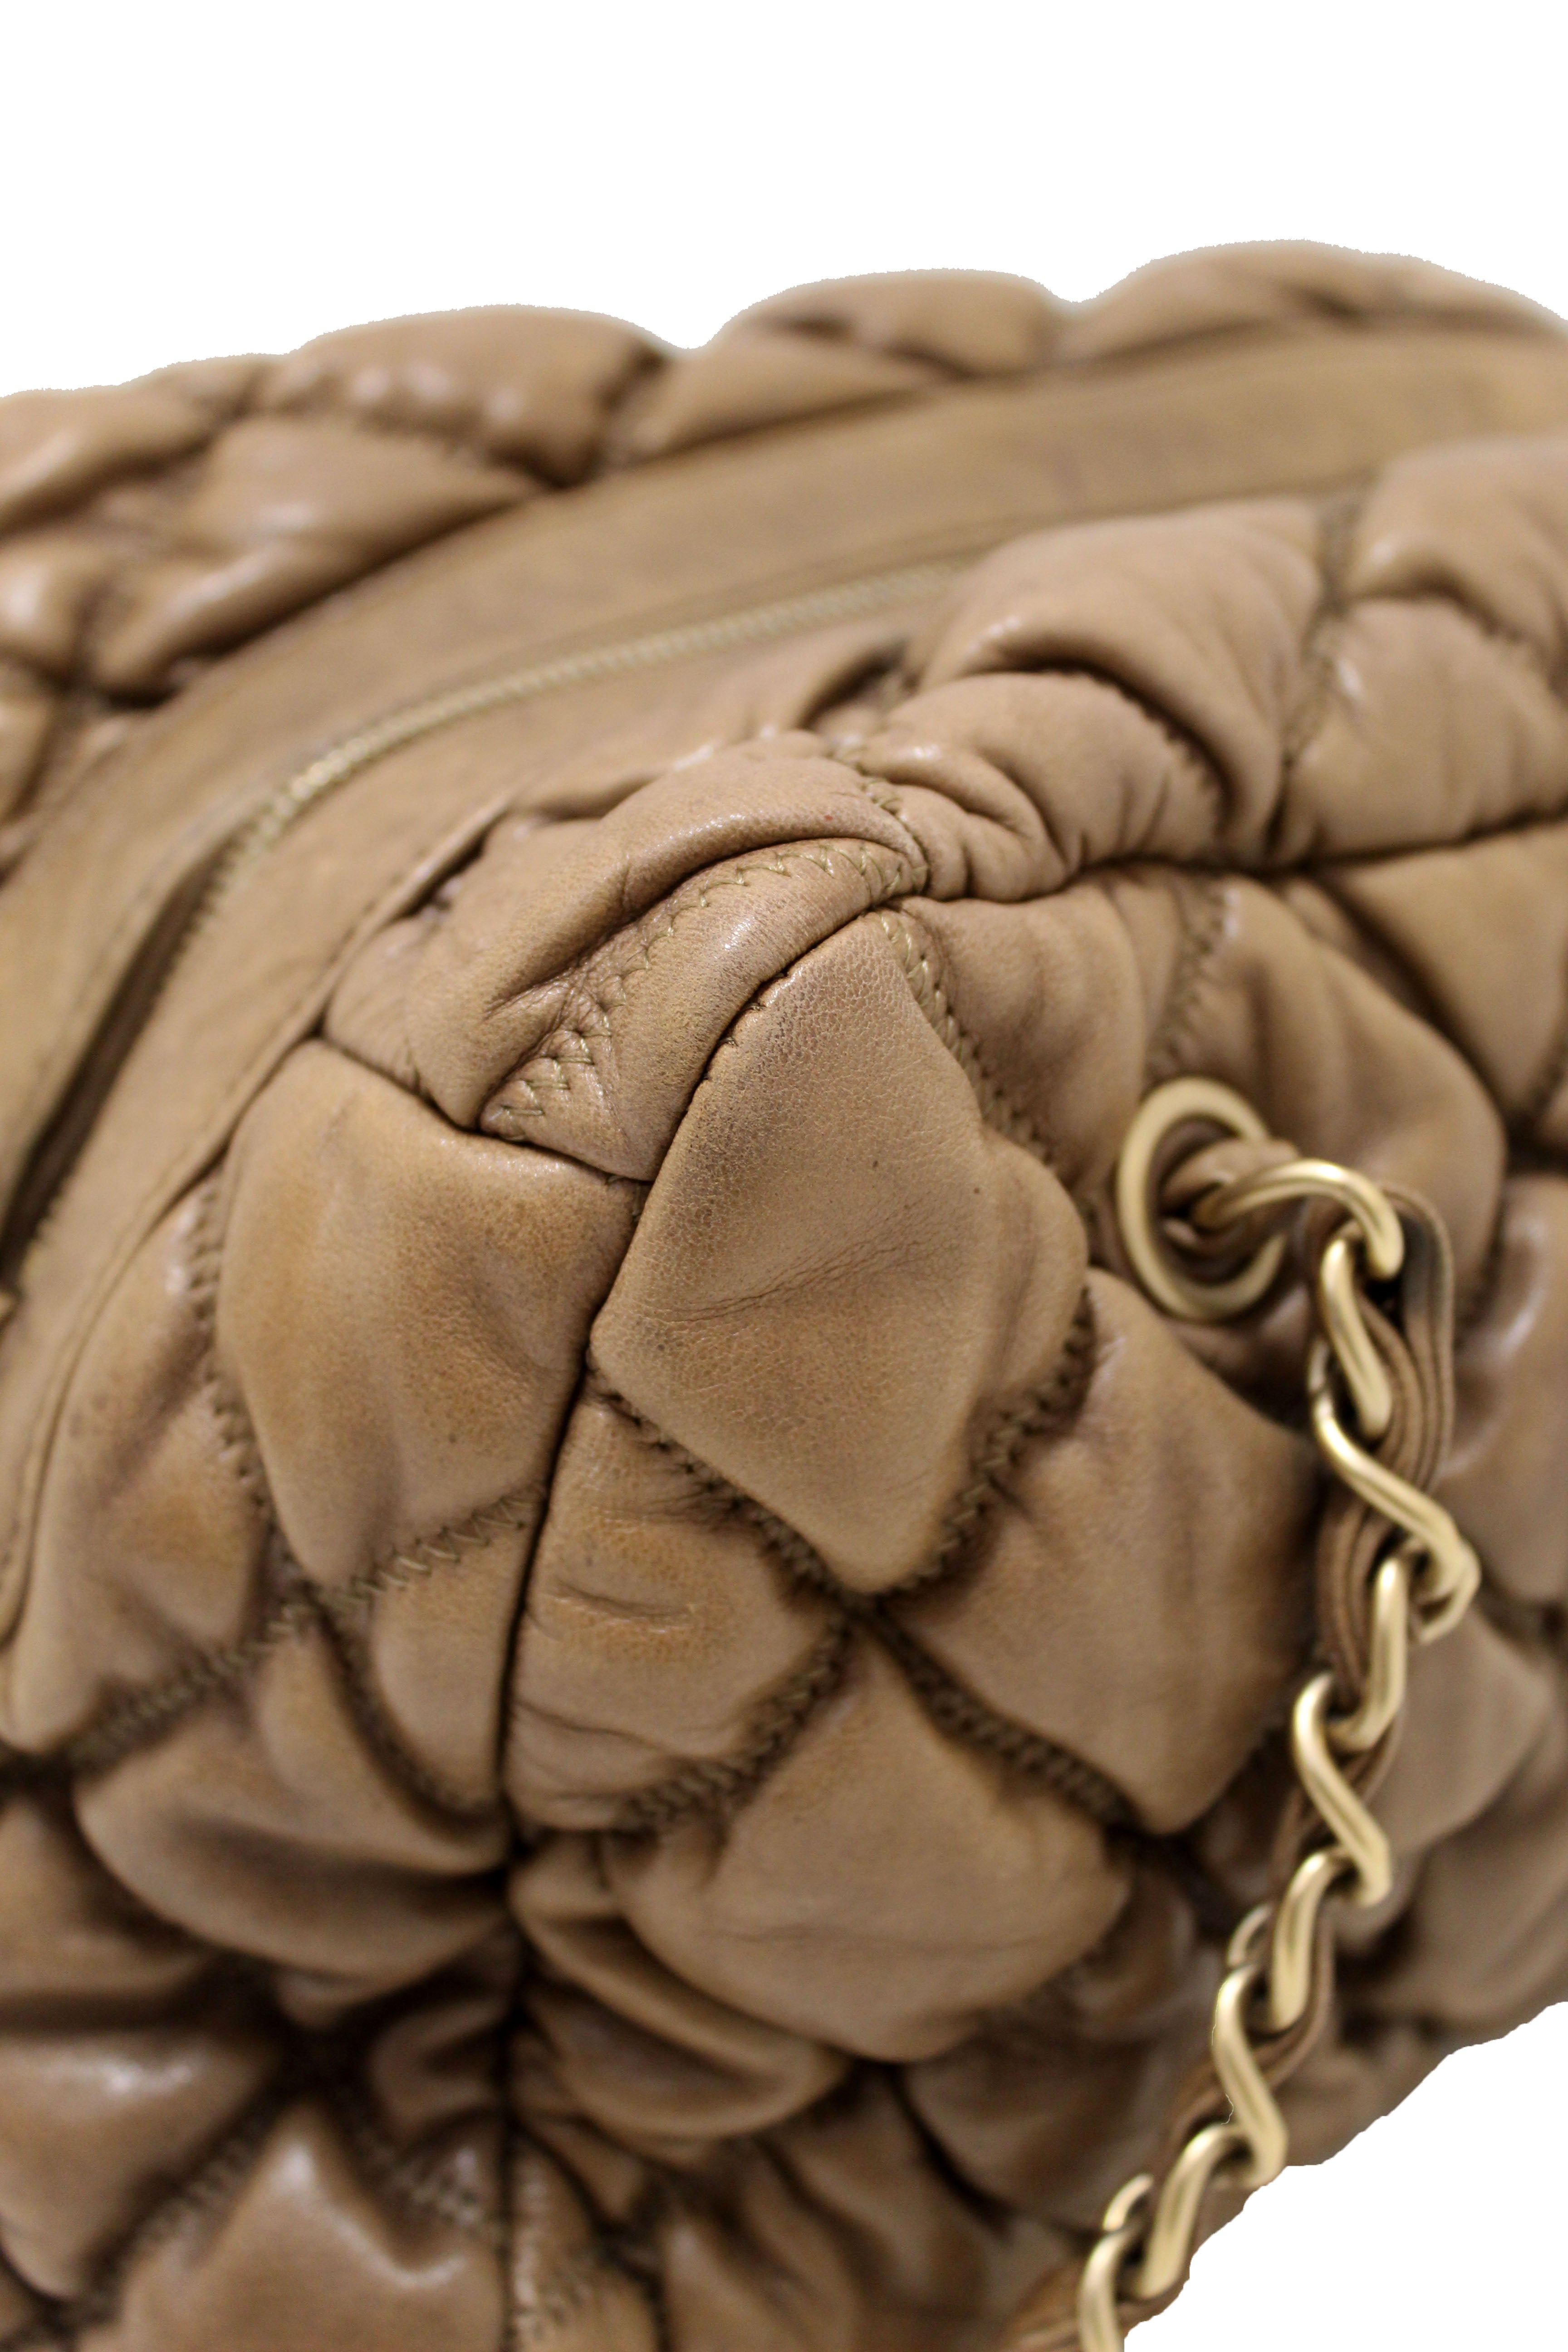 Authentic Chanel Beige Bubble Quilted Lambskin Leather Bowler Bag